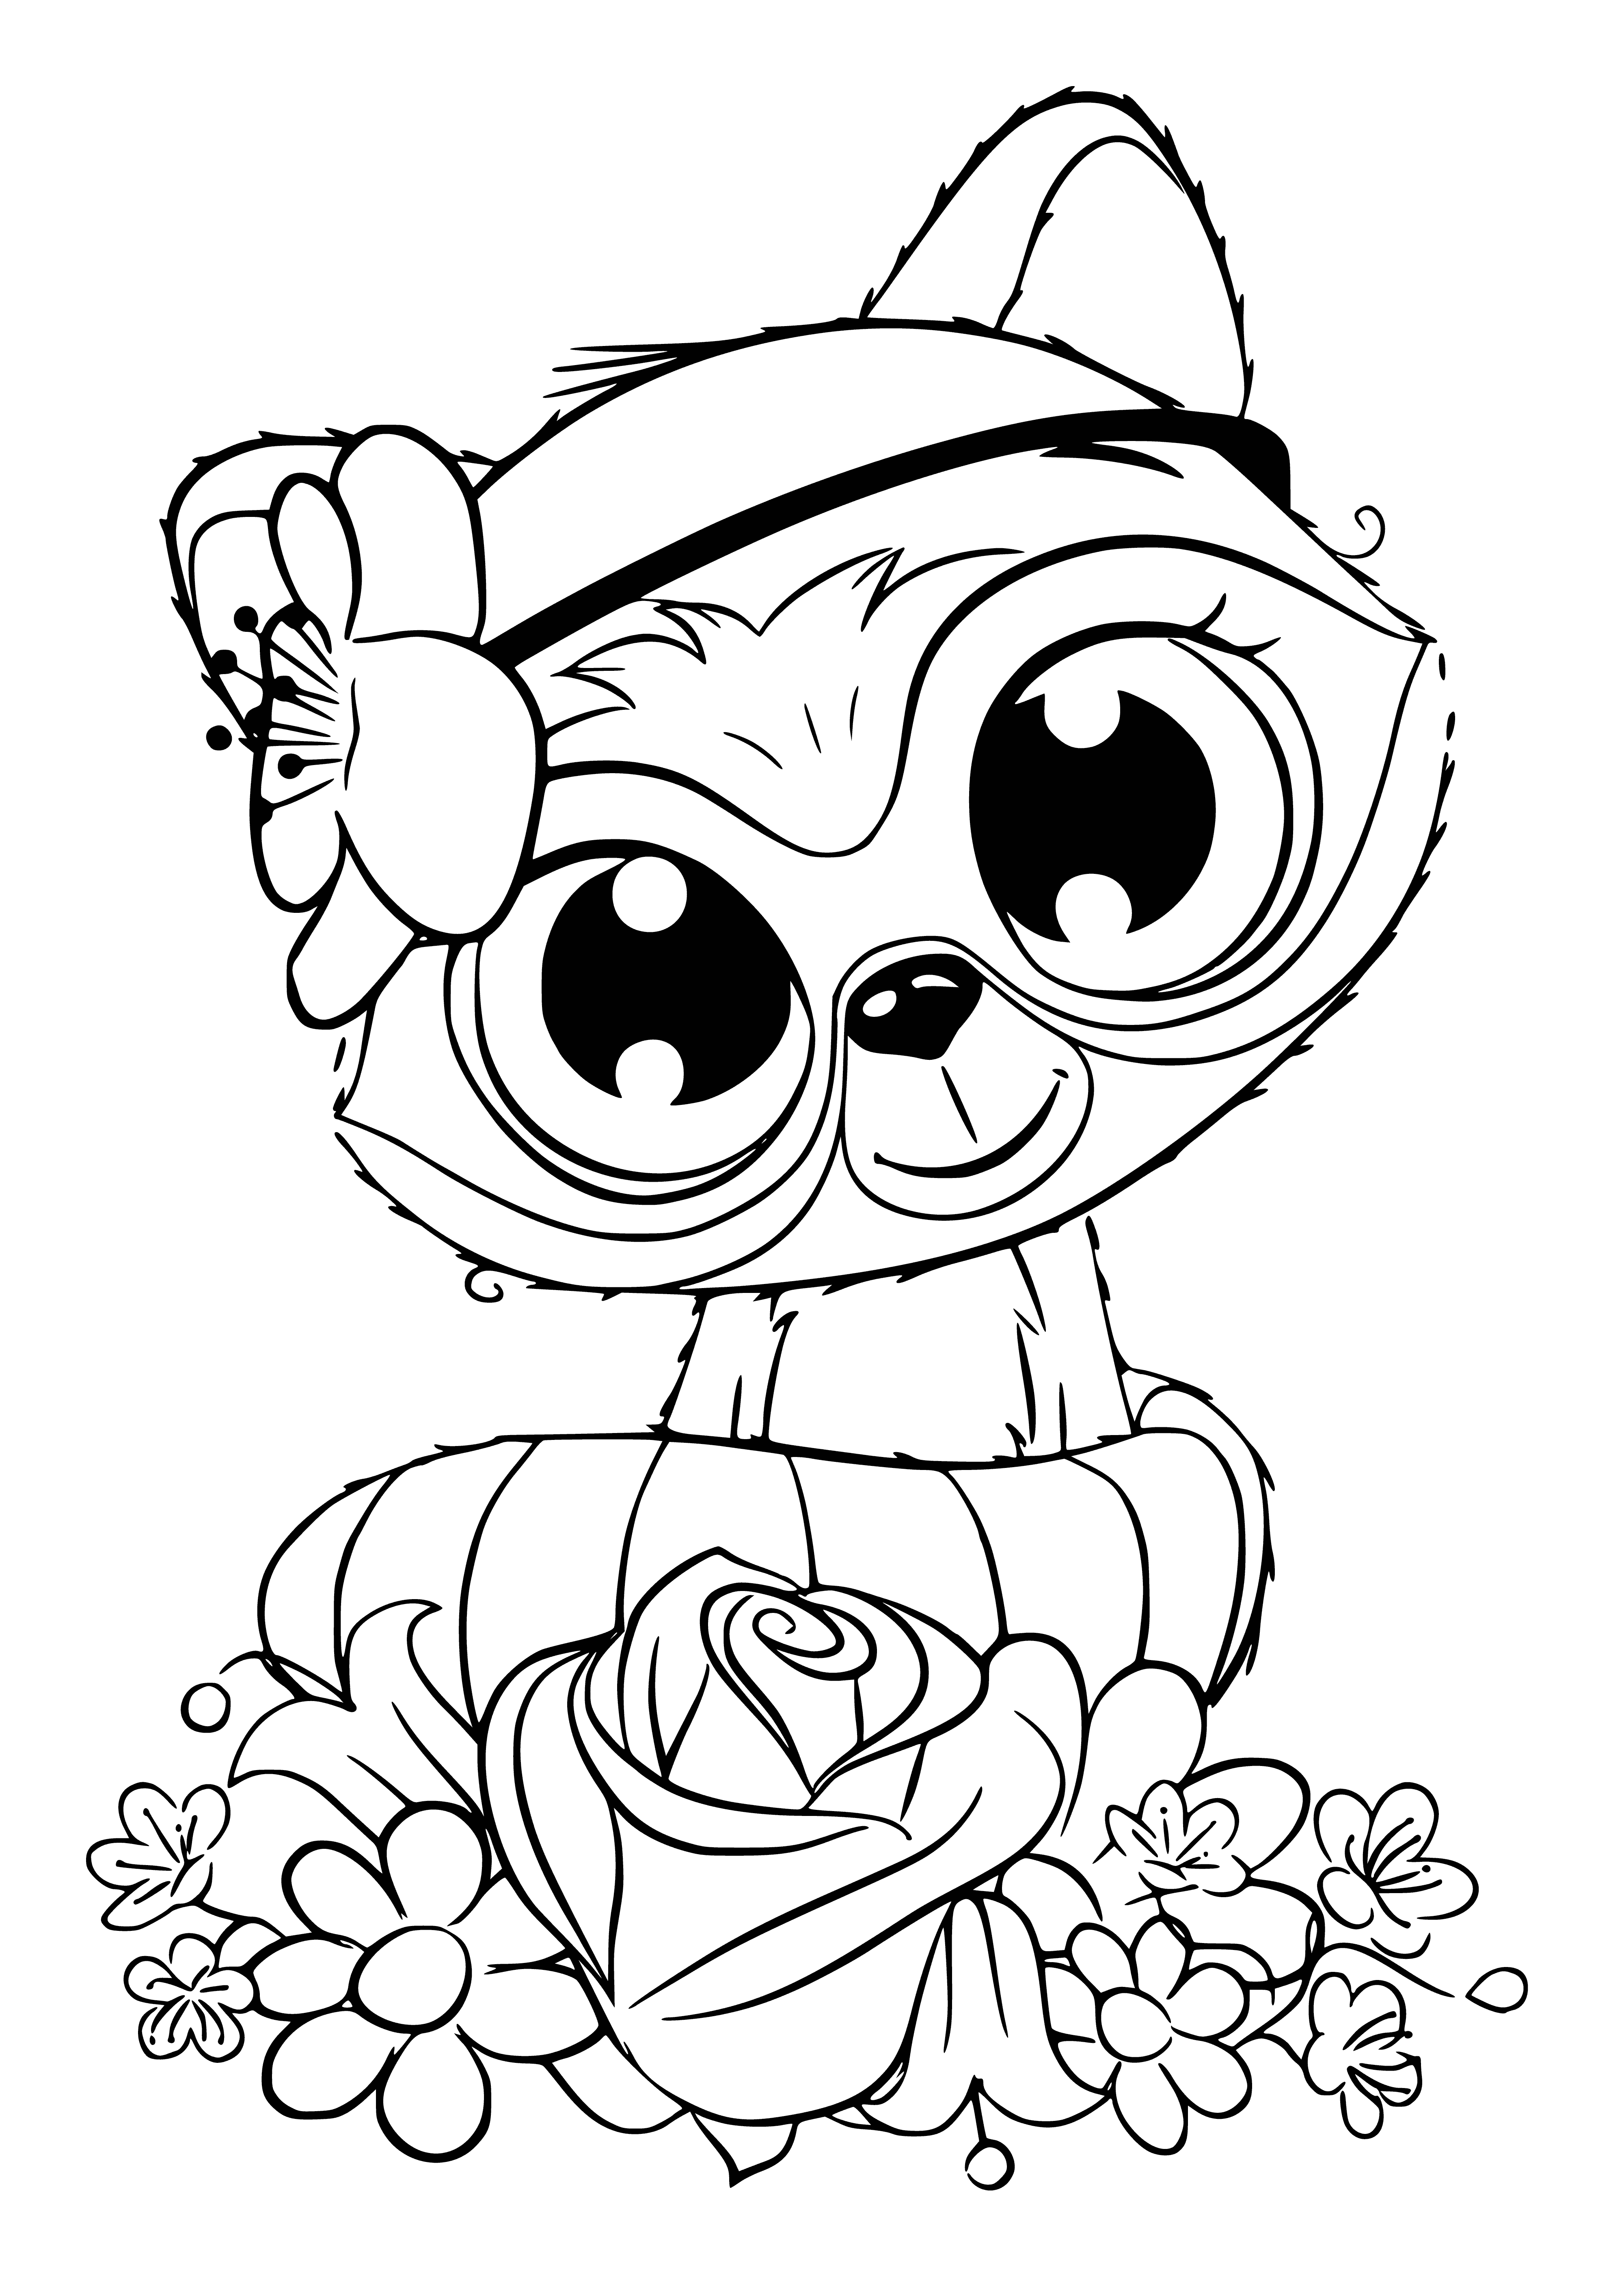 coloring page: A cute, gray raccoon with black stripes, black eyes & mask, small nose & big, bushy tail stands on hind legs with paws raised. #coloring